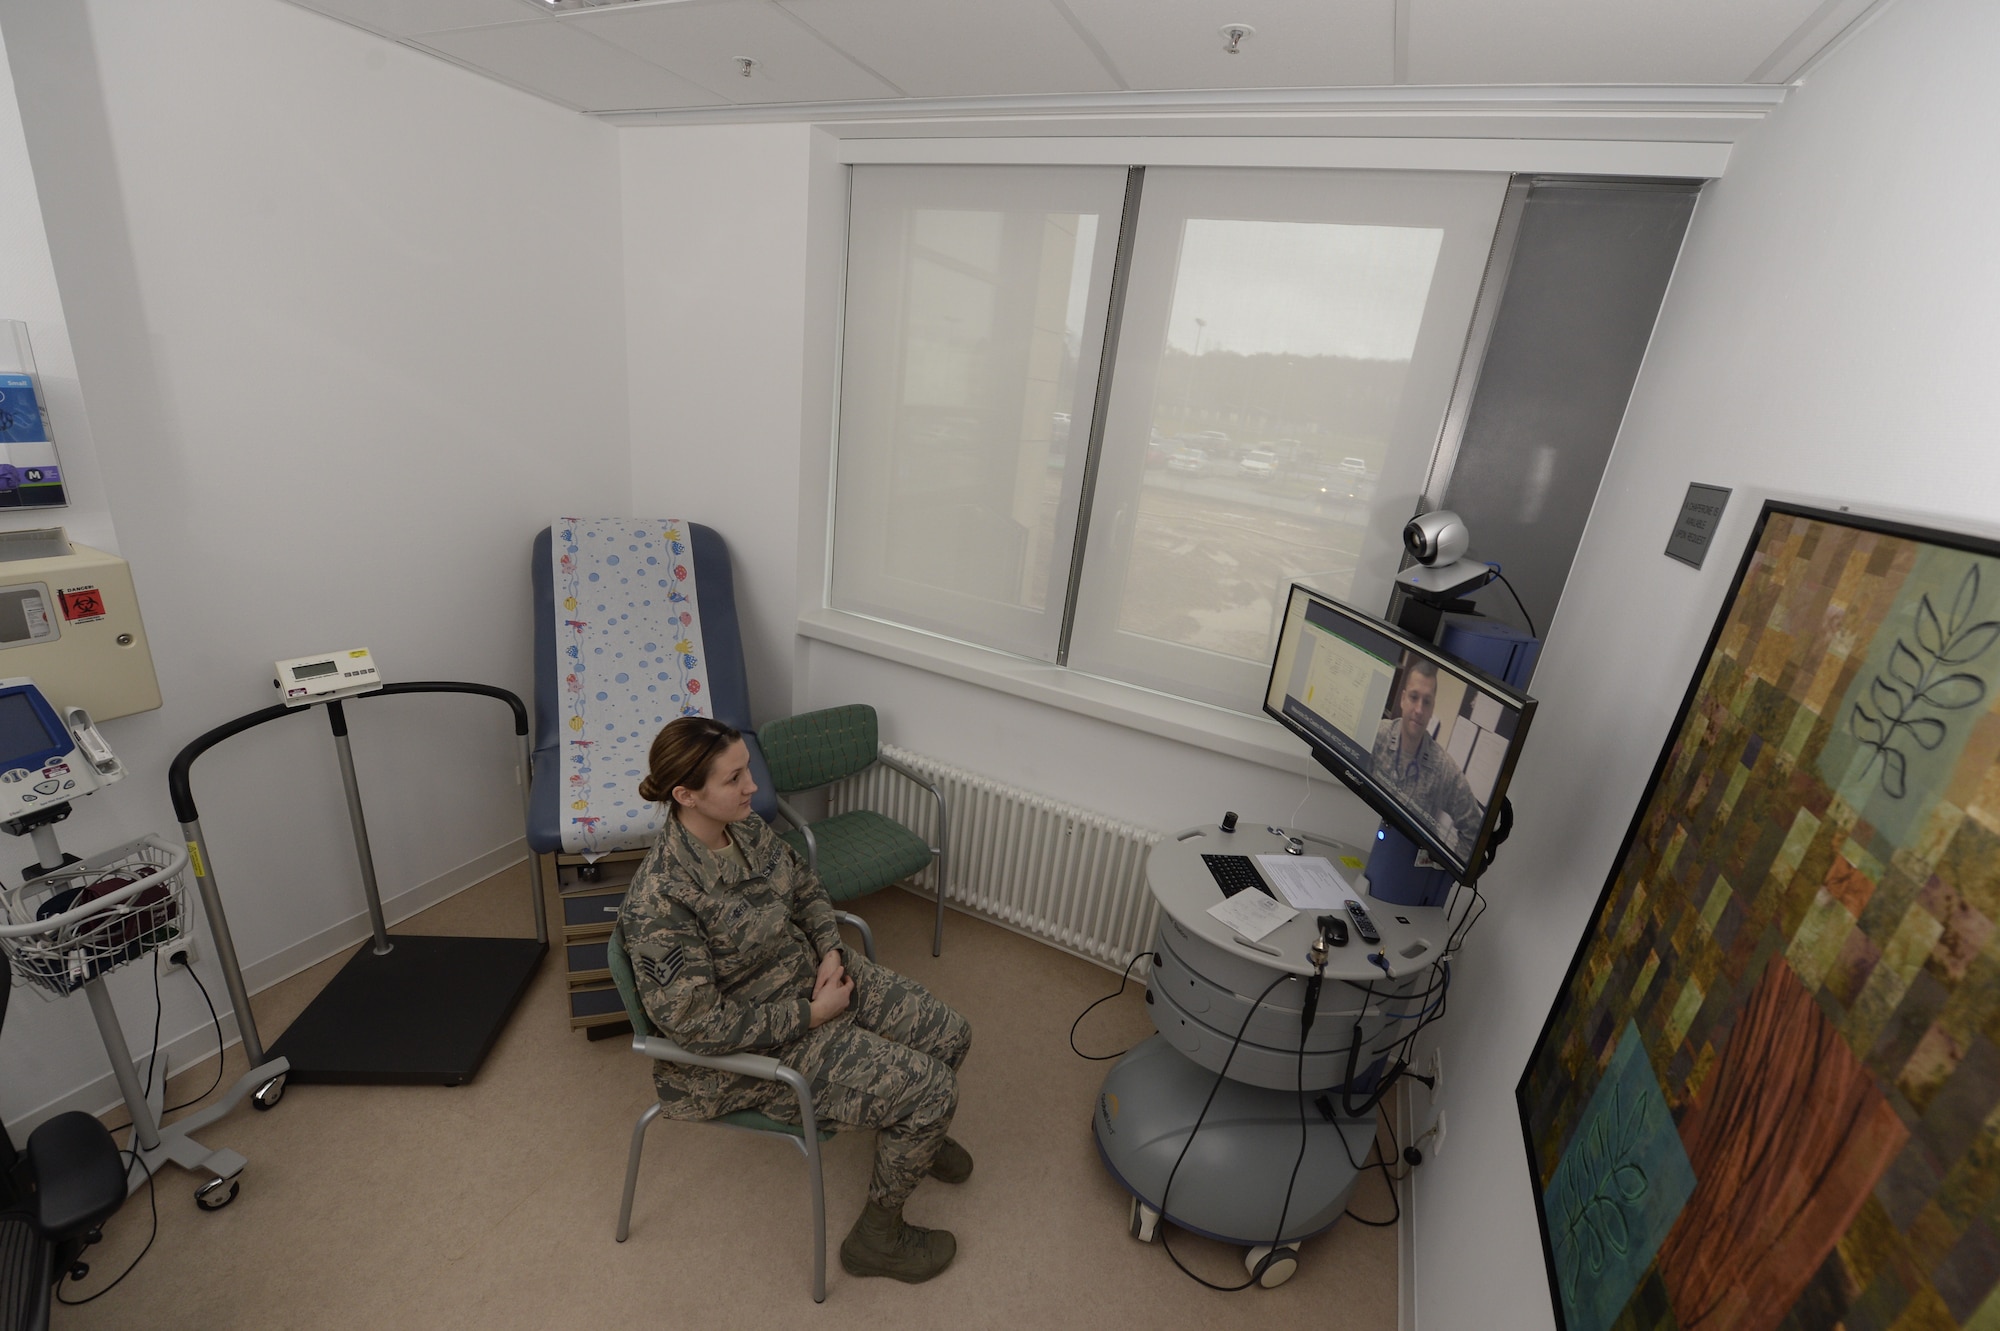 Senior Airman Kimberly Deveau sits in a private room at Spangdahlem Air Base, Germany as she receives specialty genetic counseling via a video teleconference from Capt. (Dr.) Mauricio De Castro, staff medical geneticist at Keesler Air Force Base, Miss., Feb. 1, 2018. The tele-genetics pilot program connects patients directly to specialized genetic counselors and geneticists from other locations. (U.S. Air Force photo by Staff Sgt. Jonathan Snyder)